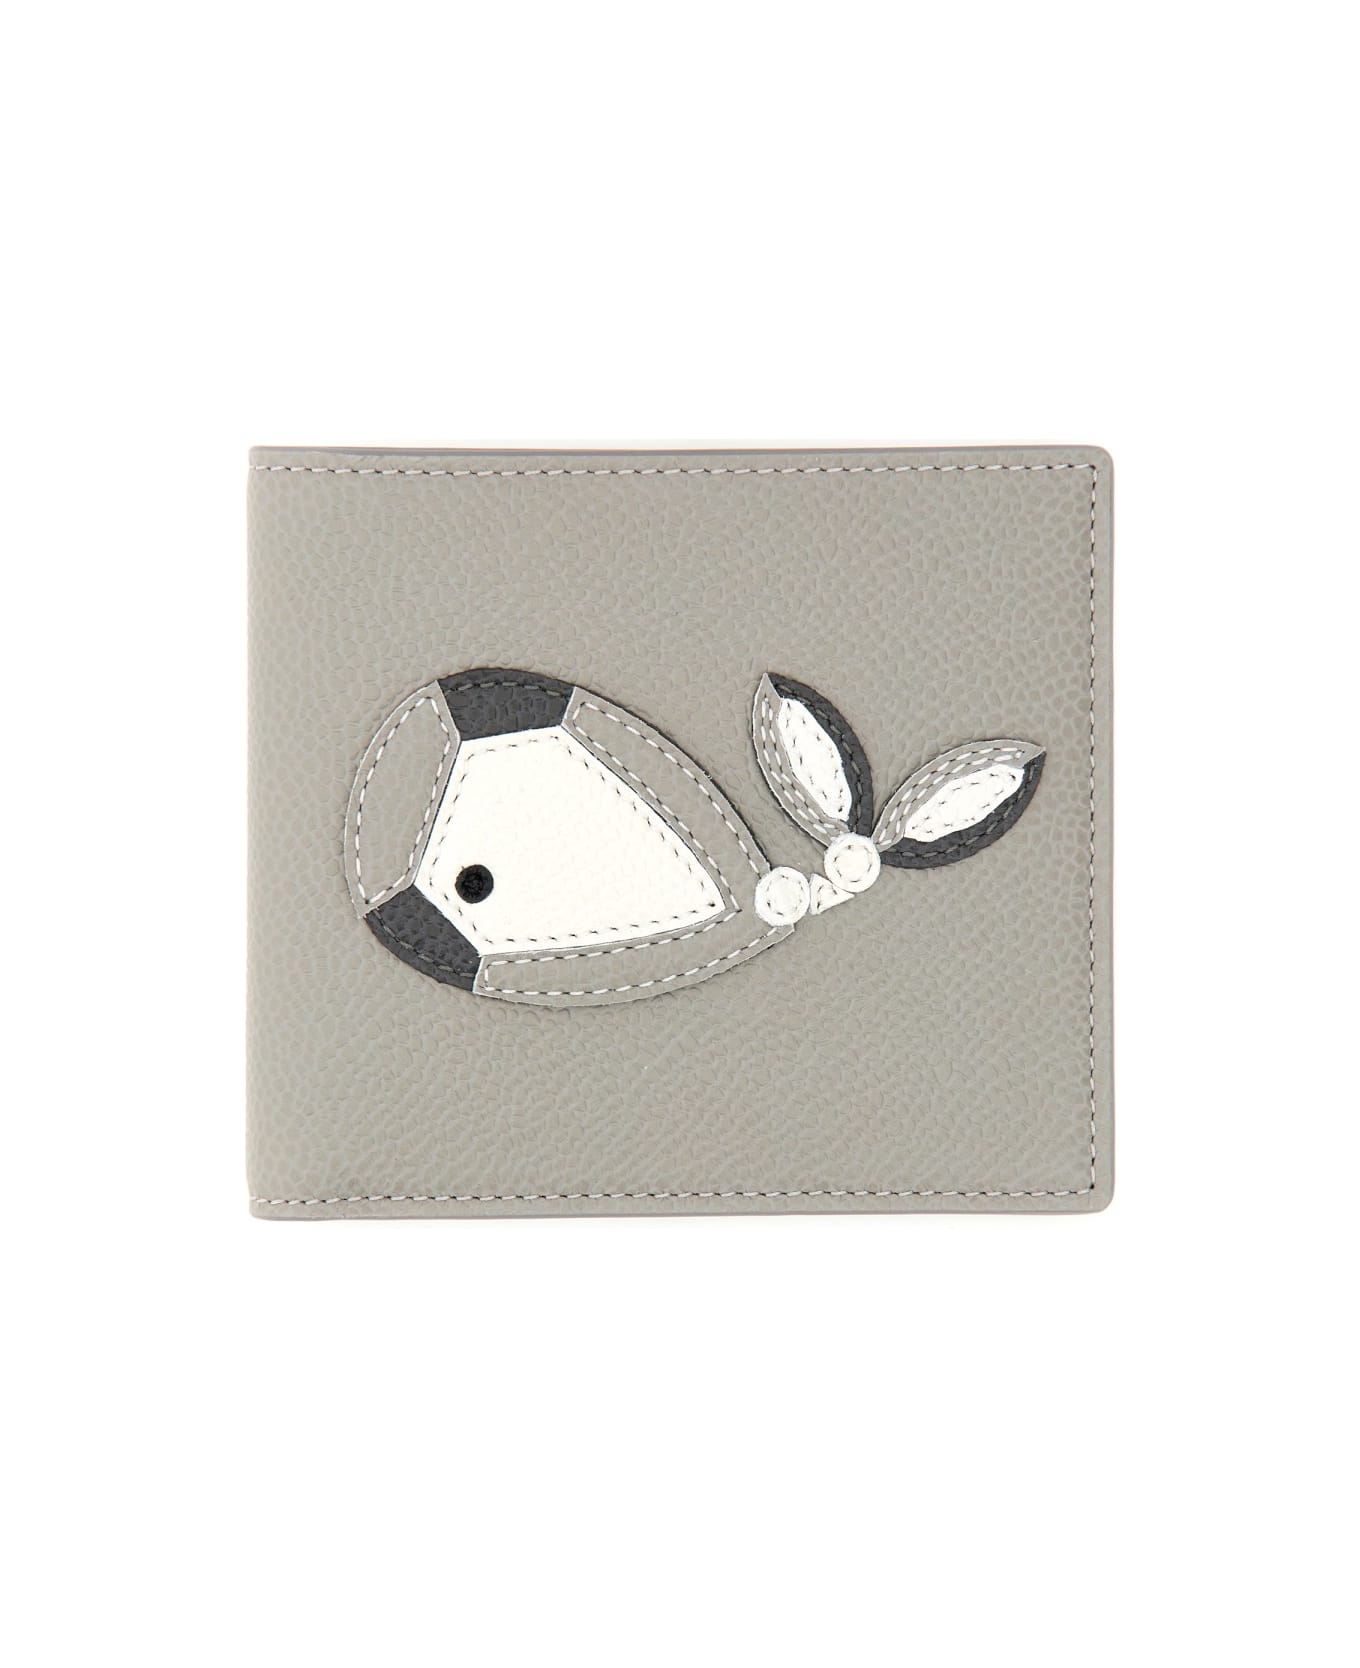 Thom Browne Wallet With Whale Application - GREY